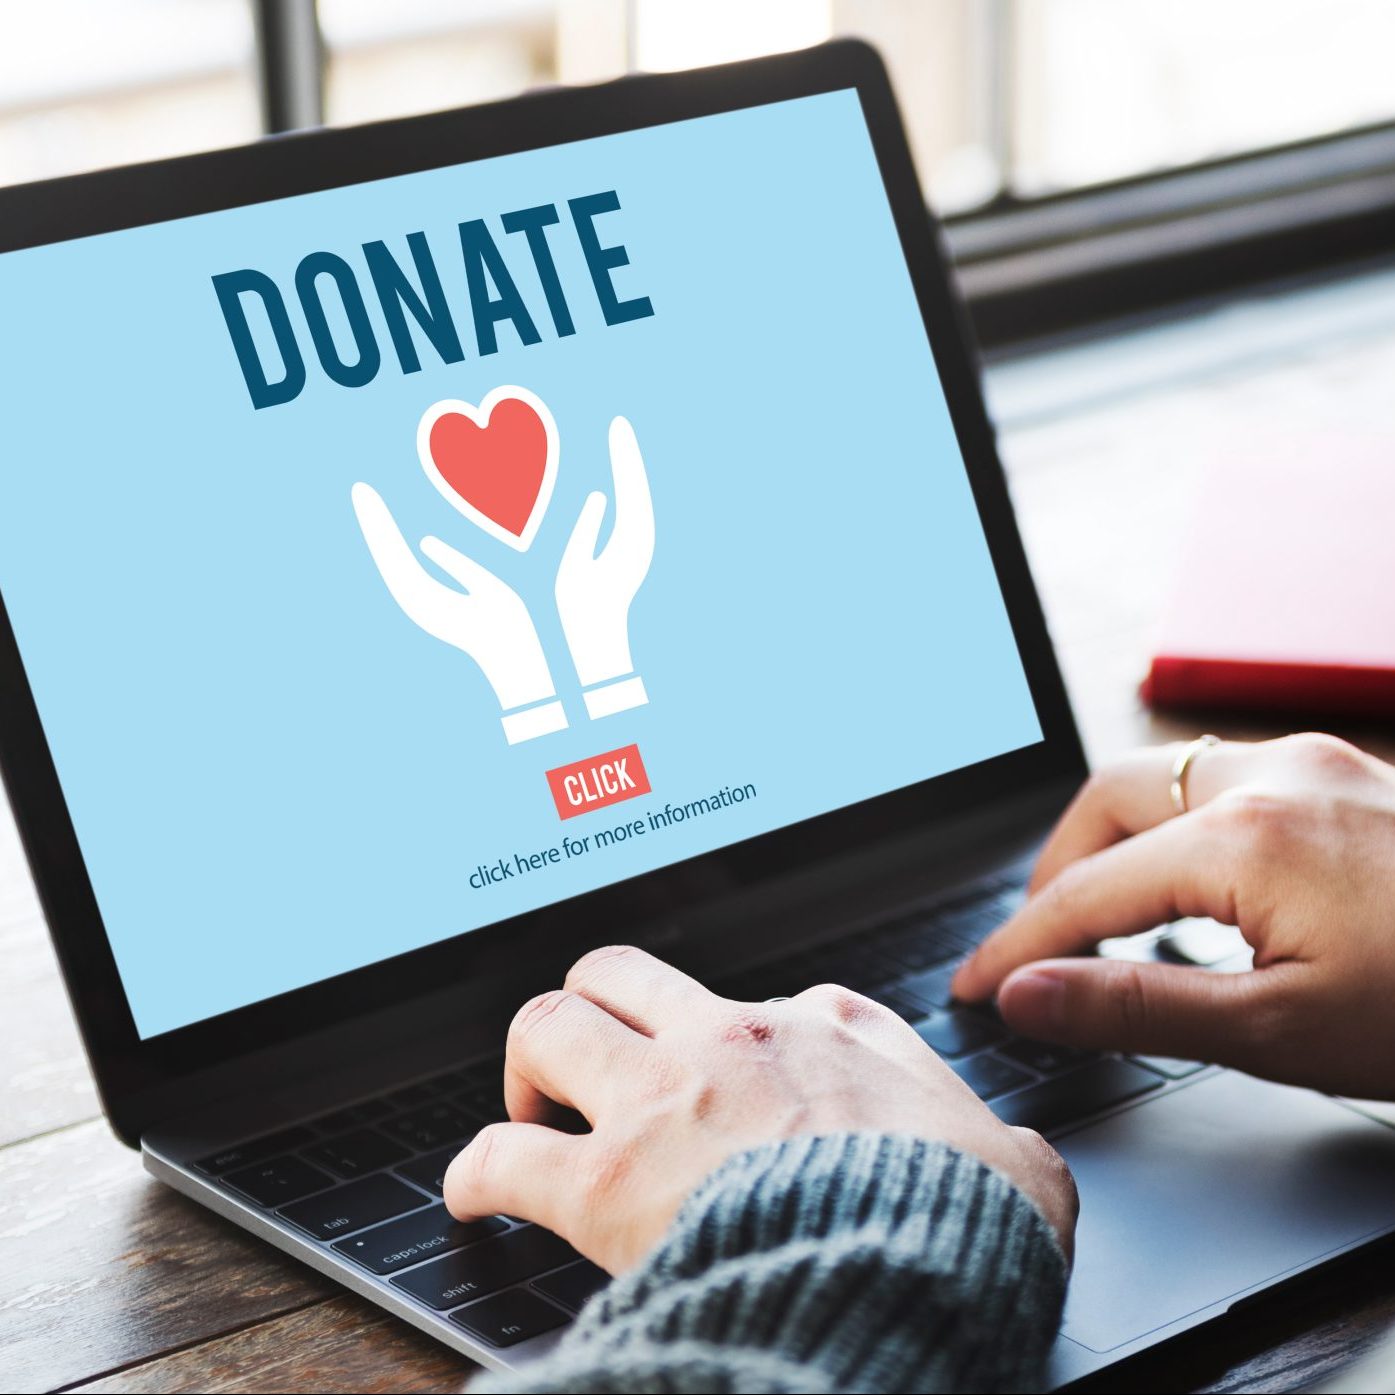 Donate Charity Give Help Offering Volunteer Concept